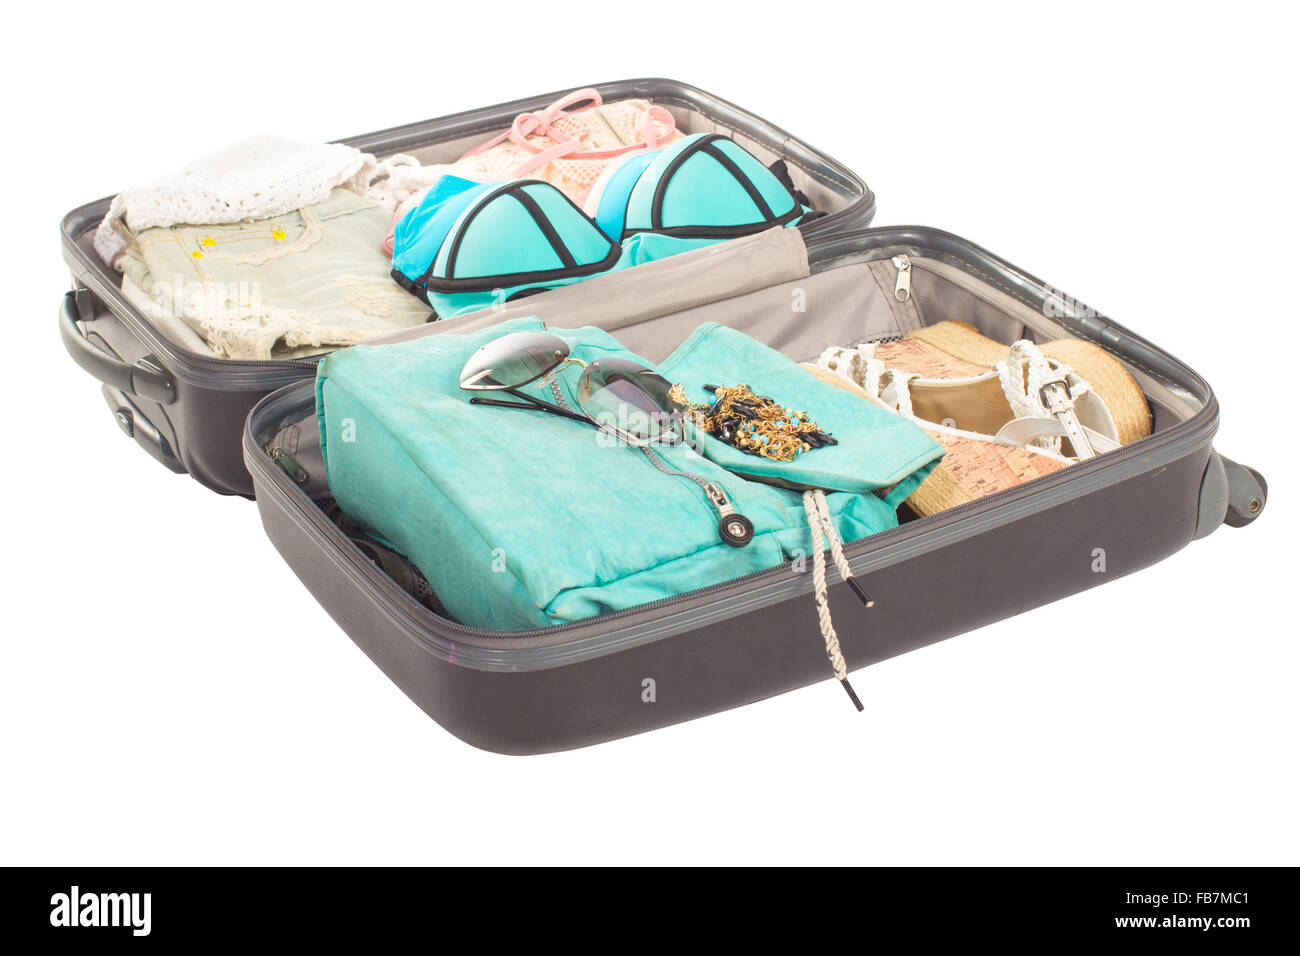 Packed, opened suitcase full of vacation items. Stock Photo